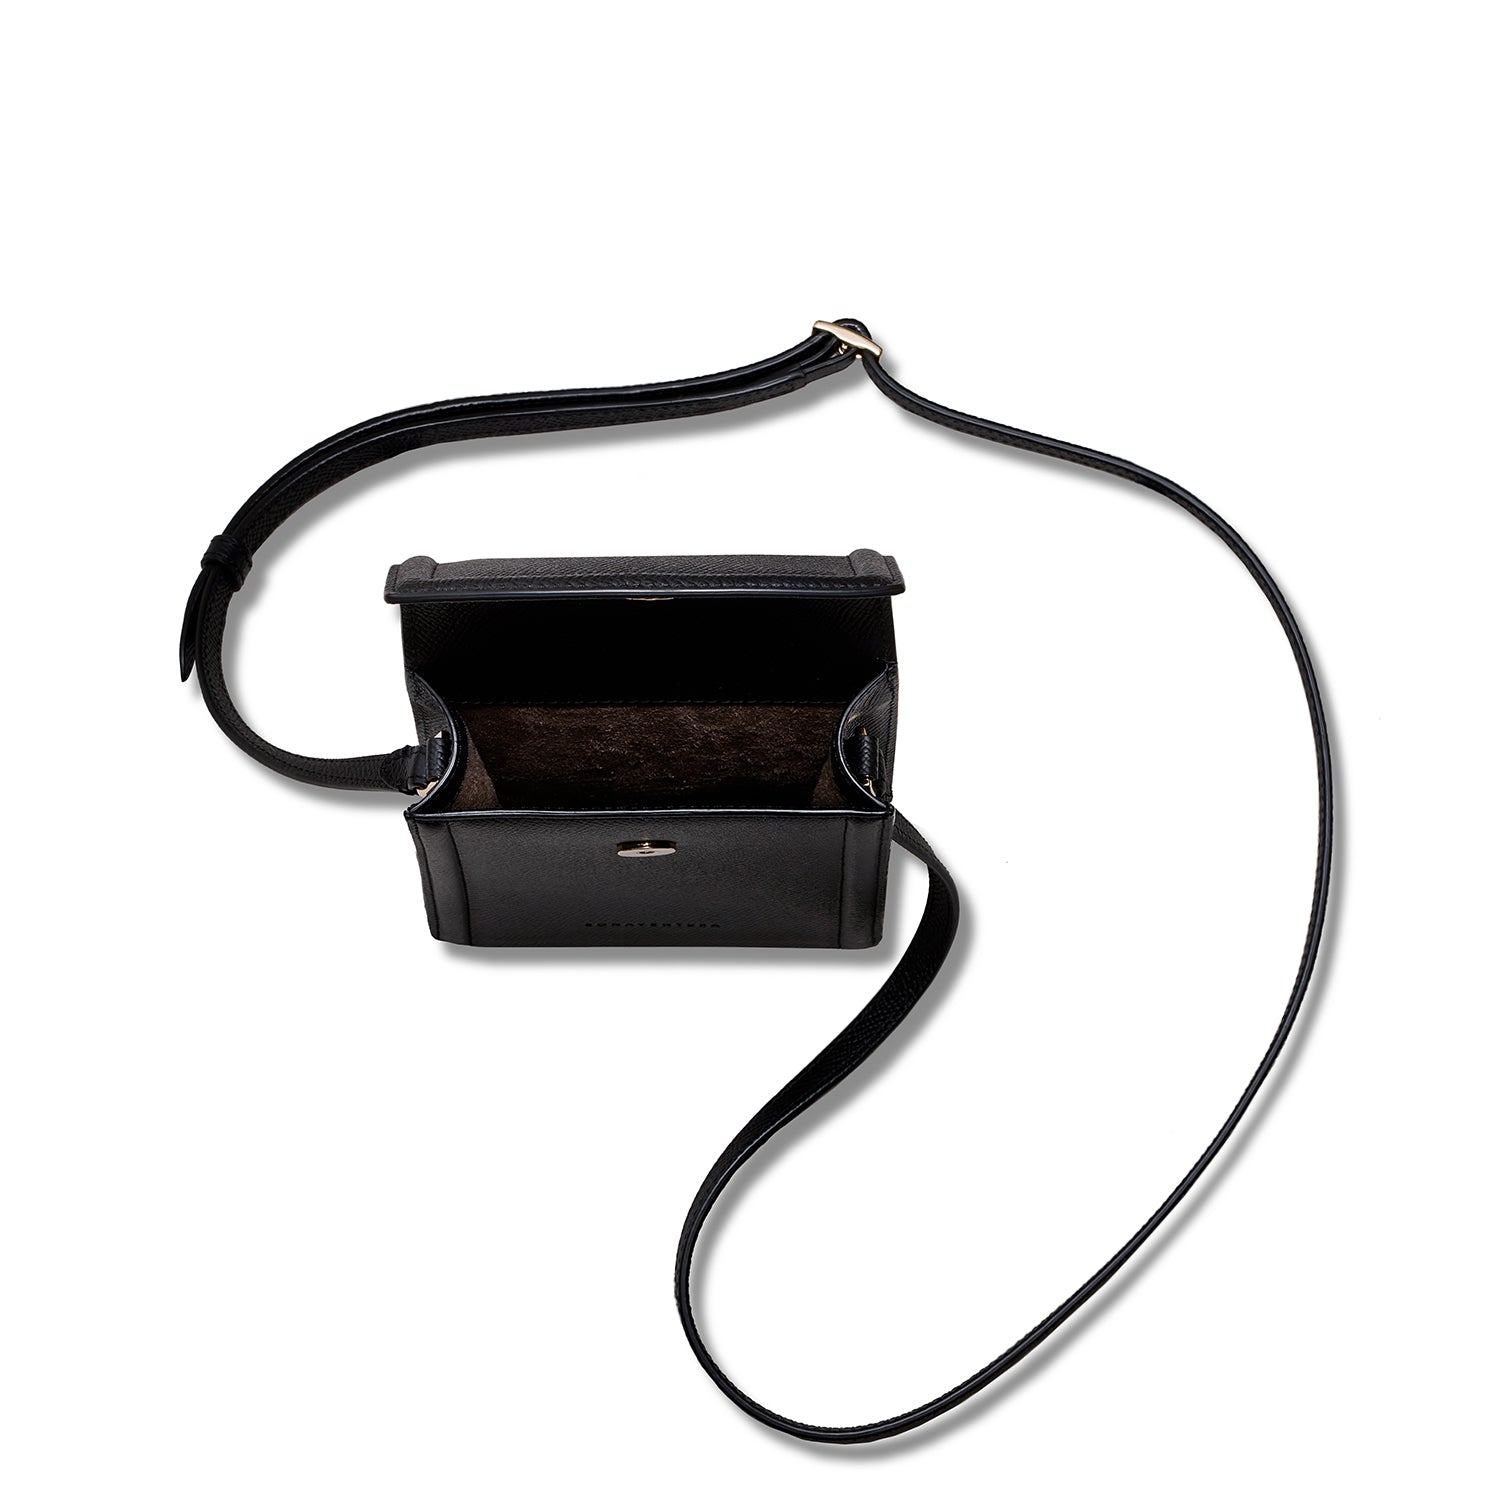 Hanna Bag in Noblesse Leather